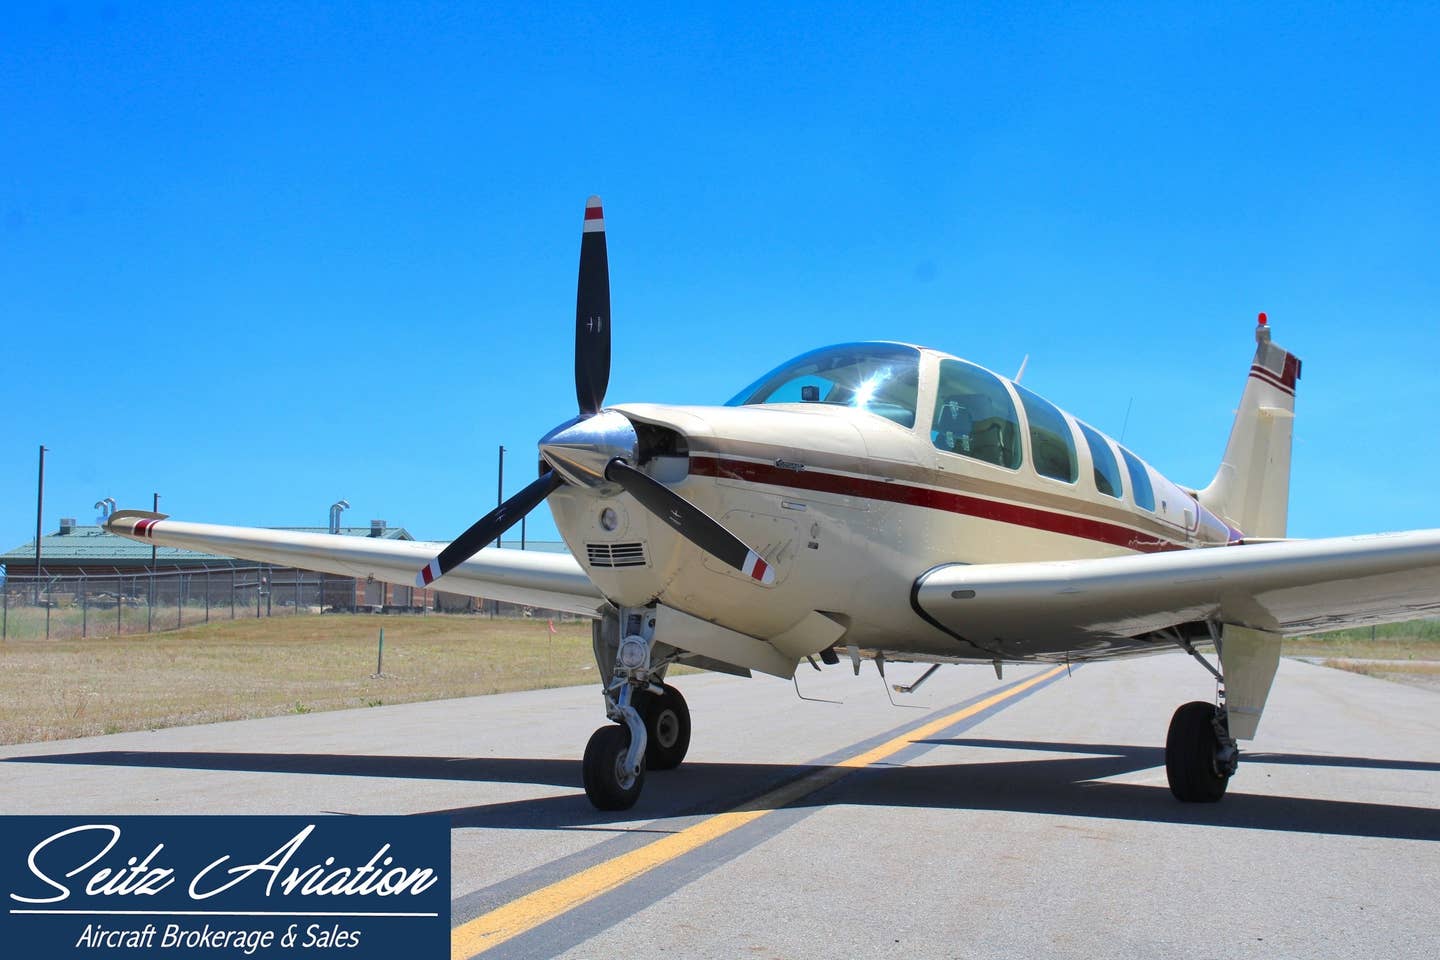 This 1983 Beechcraft A36 Bonanza Is a Family-Hauling ‘AircraftForSale’ Top Pick